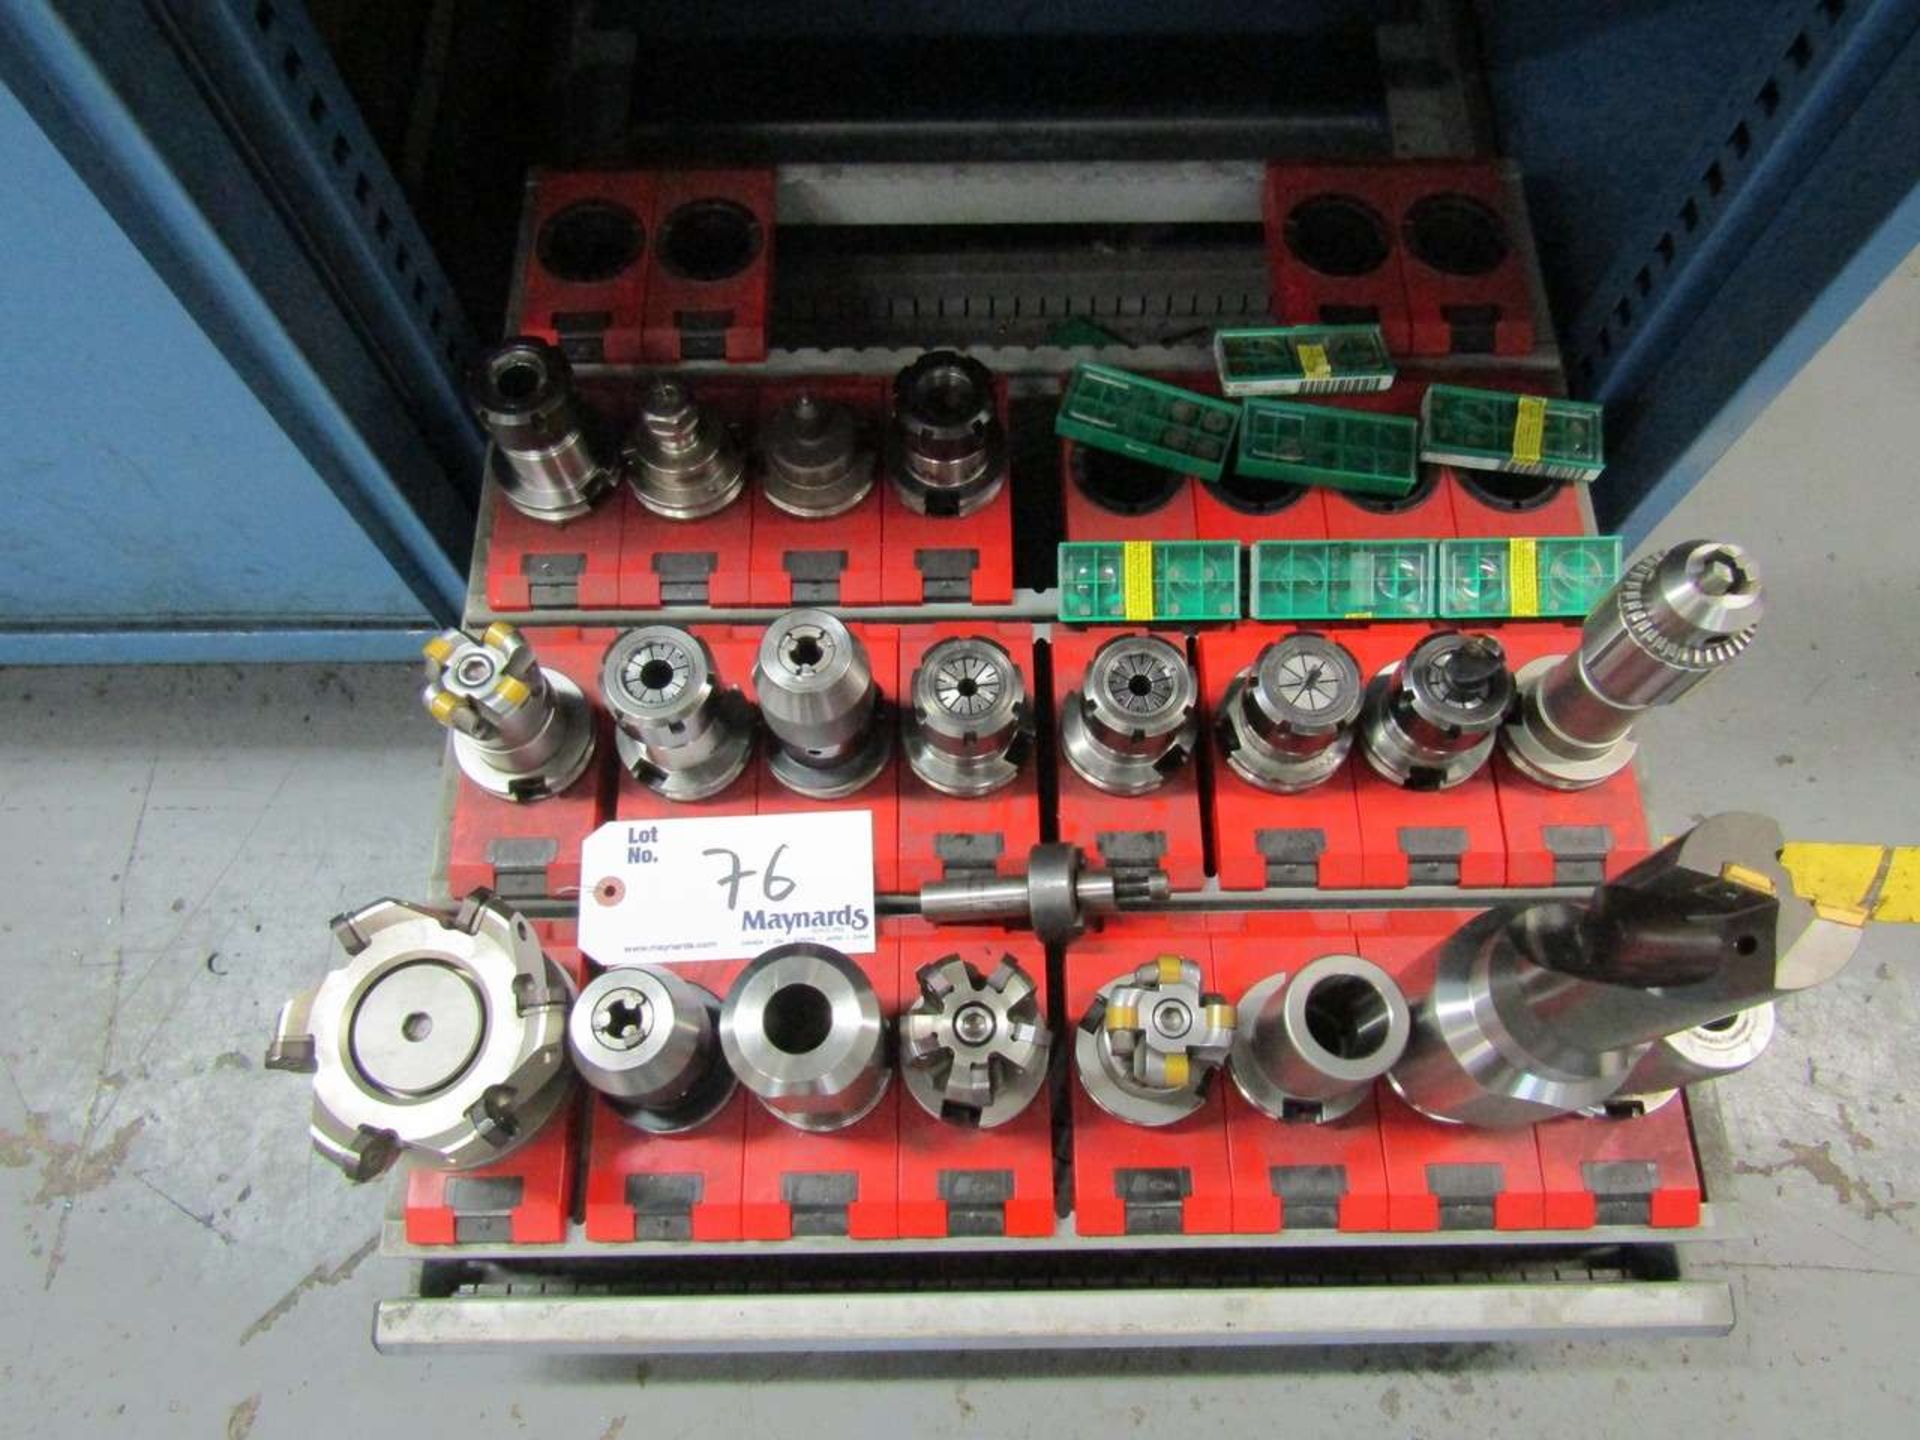 2 Drawers of Cutters and Spindle Holders for Milling Machine - Image 2 of 2